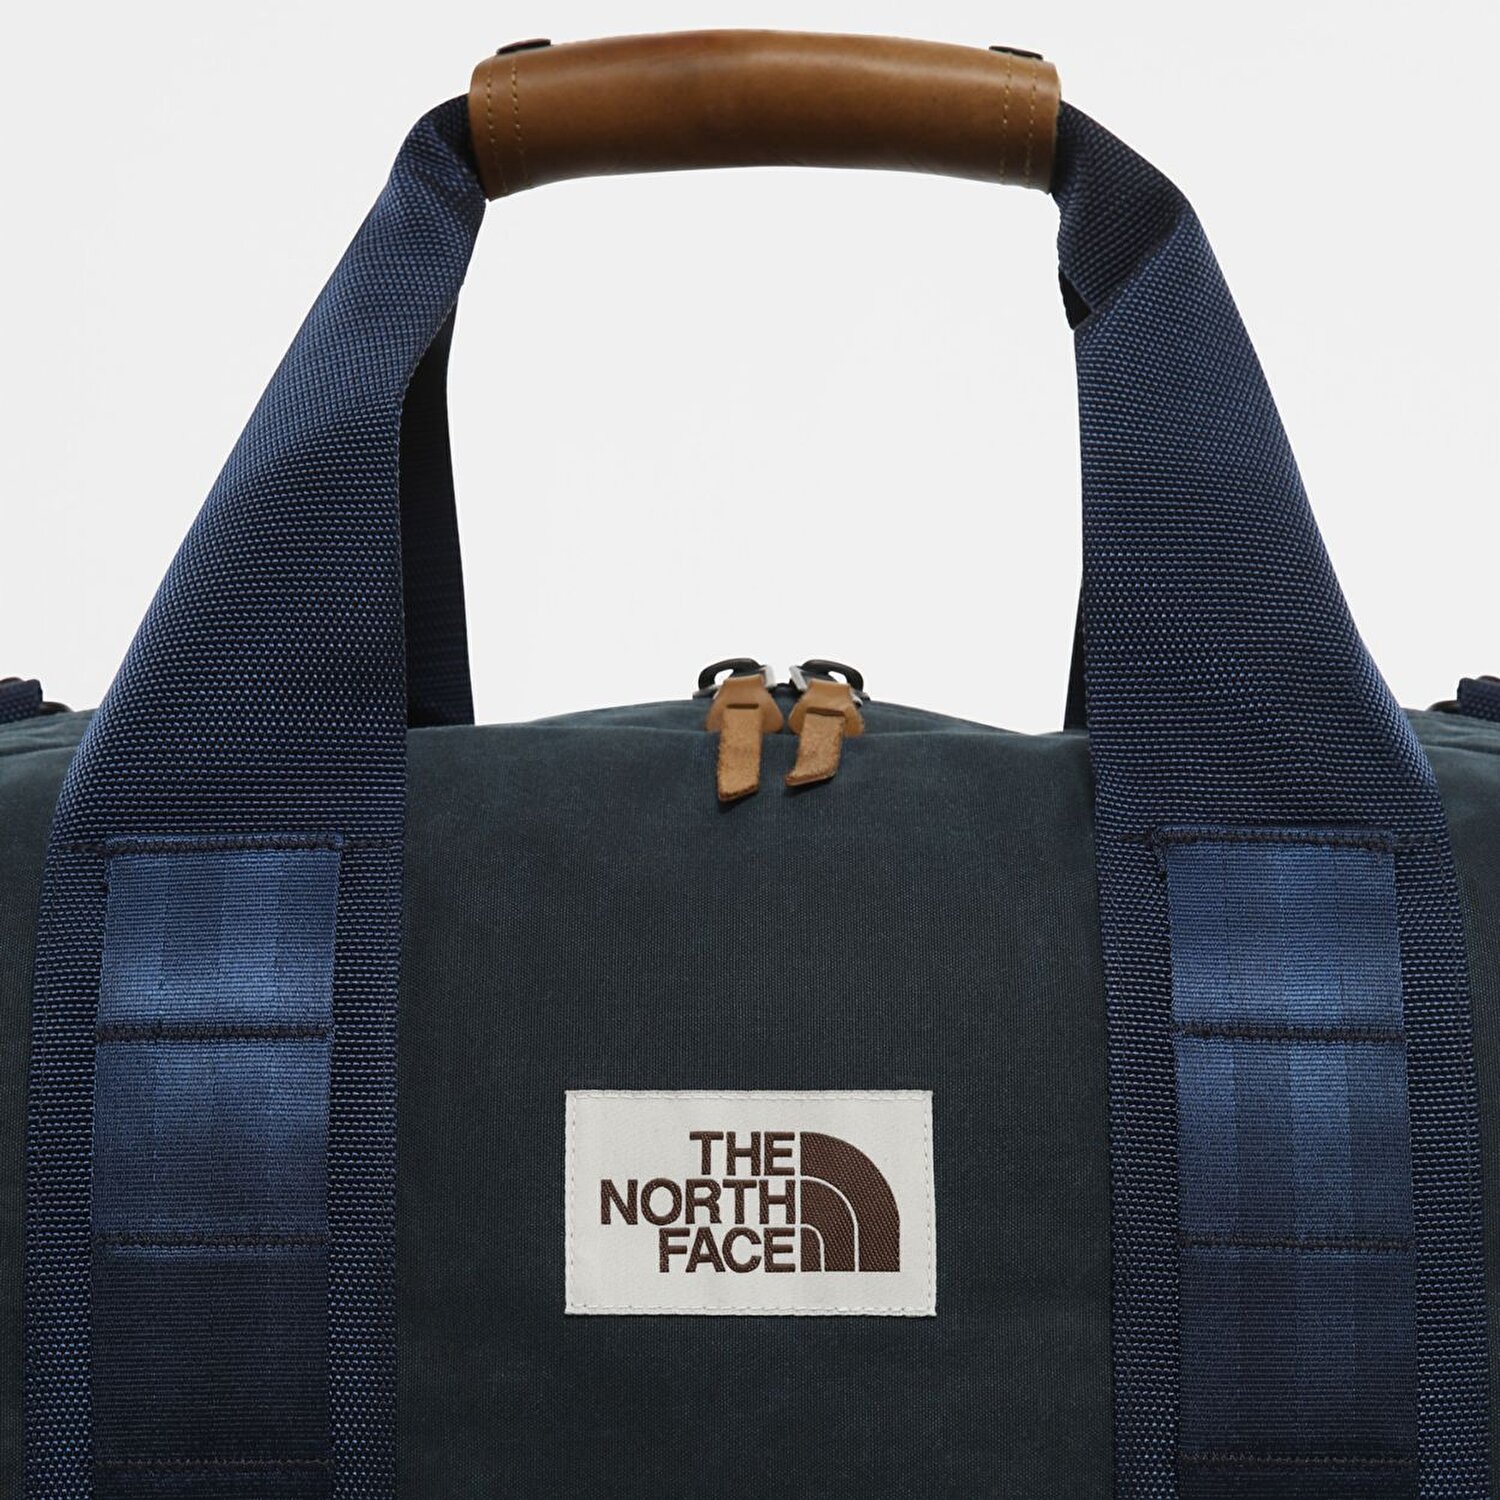 The North Face BERKELEY DUFFEL SPECIAL EDITION - S. 3